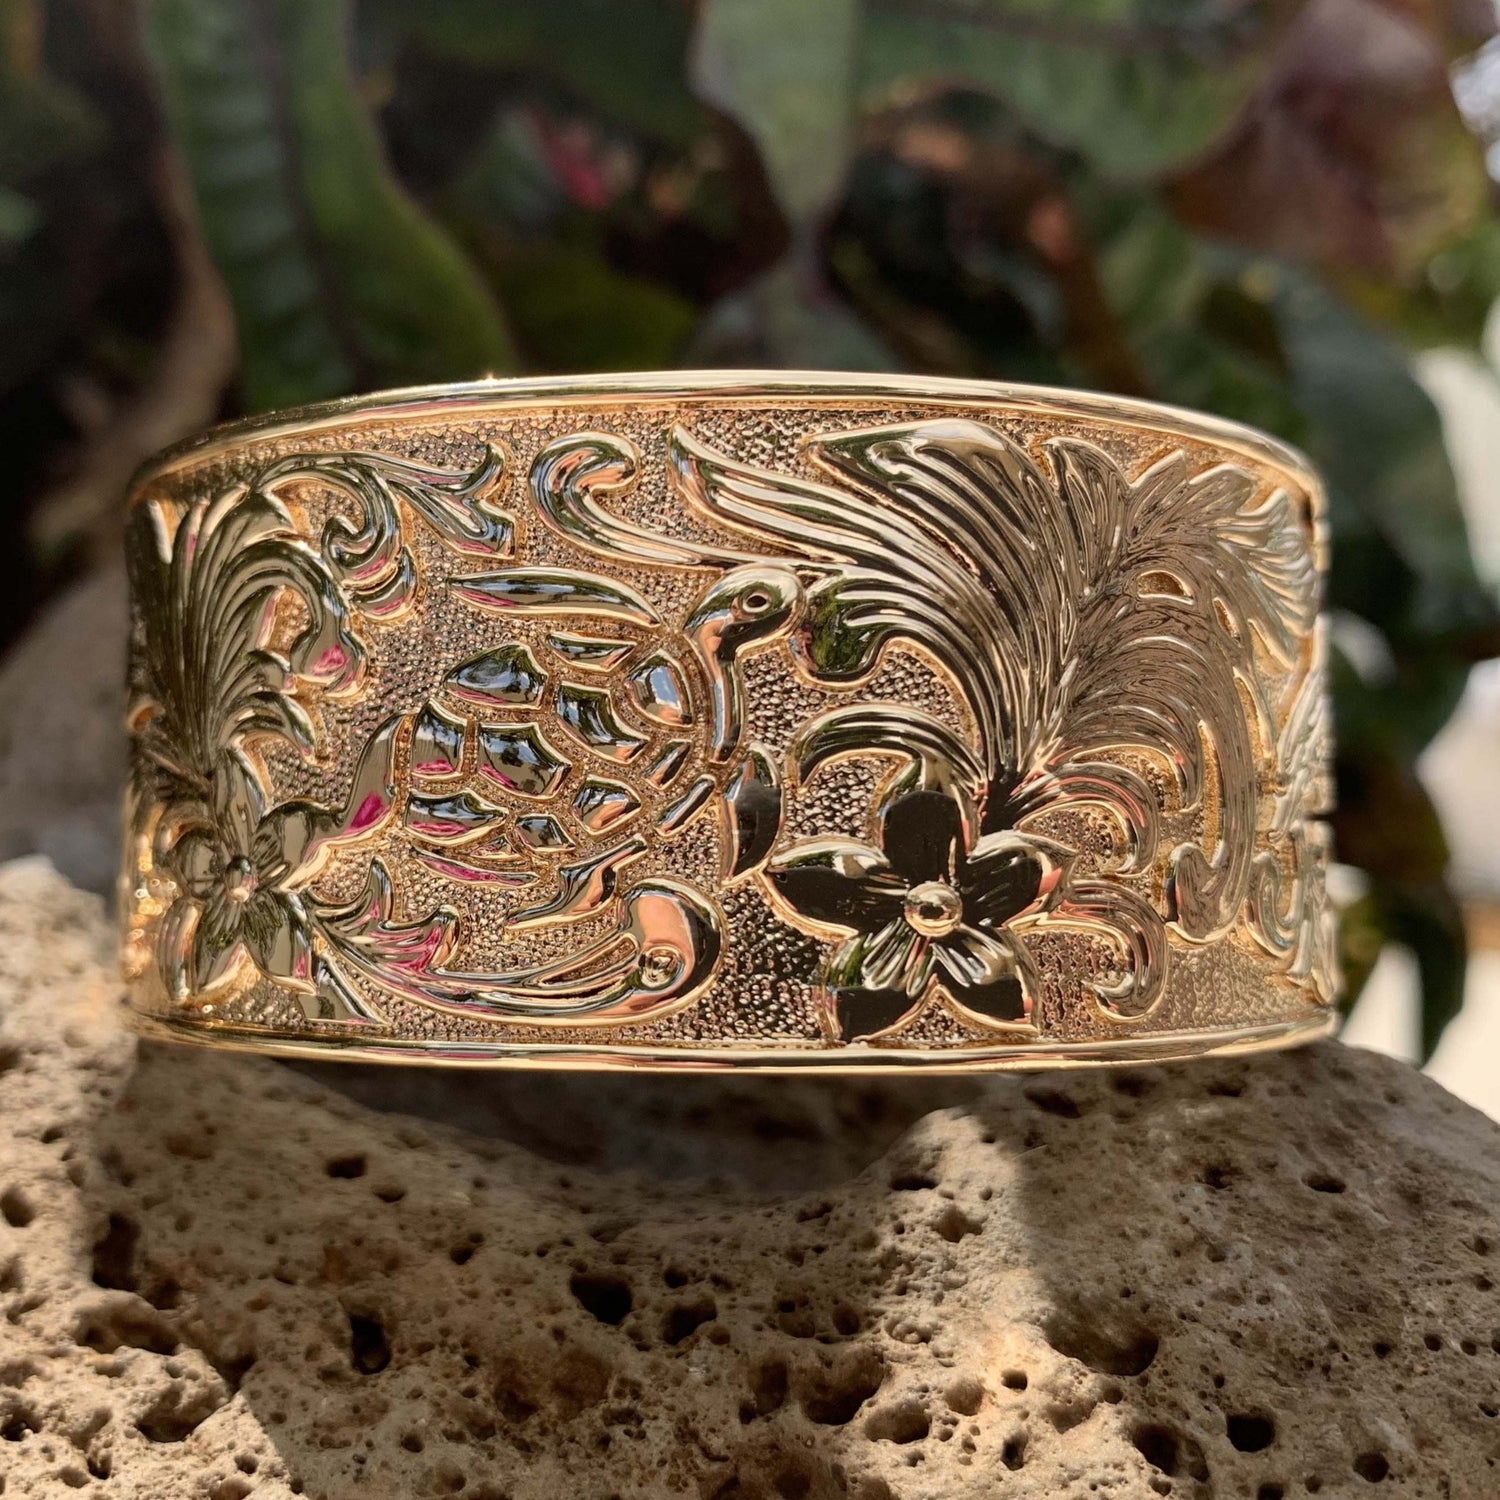 33mm under the sea bangle closeup showing turtle.